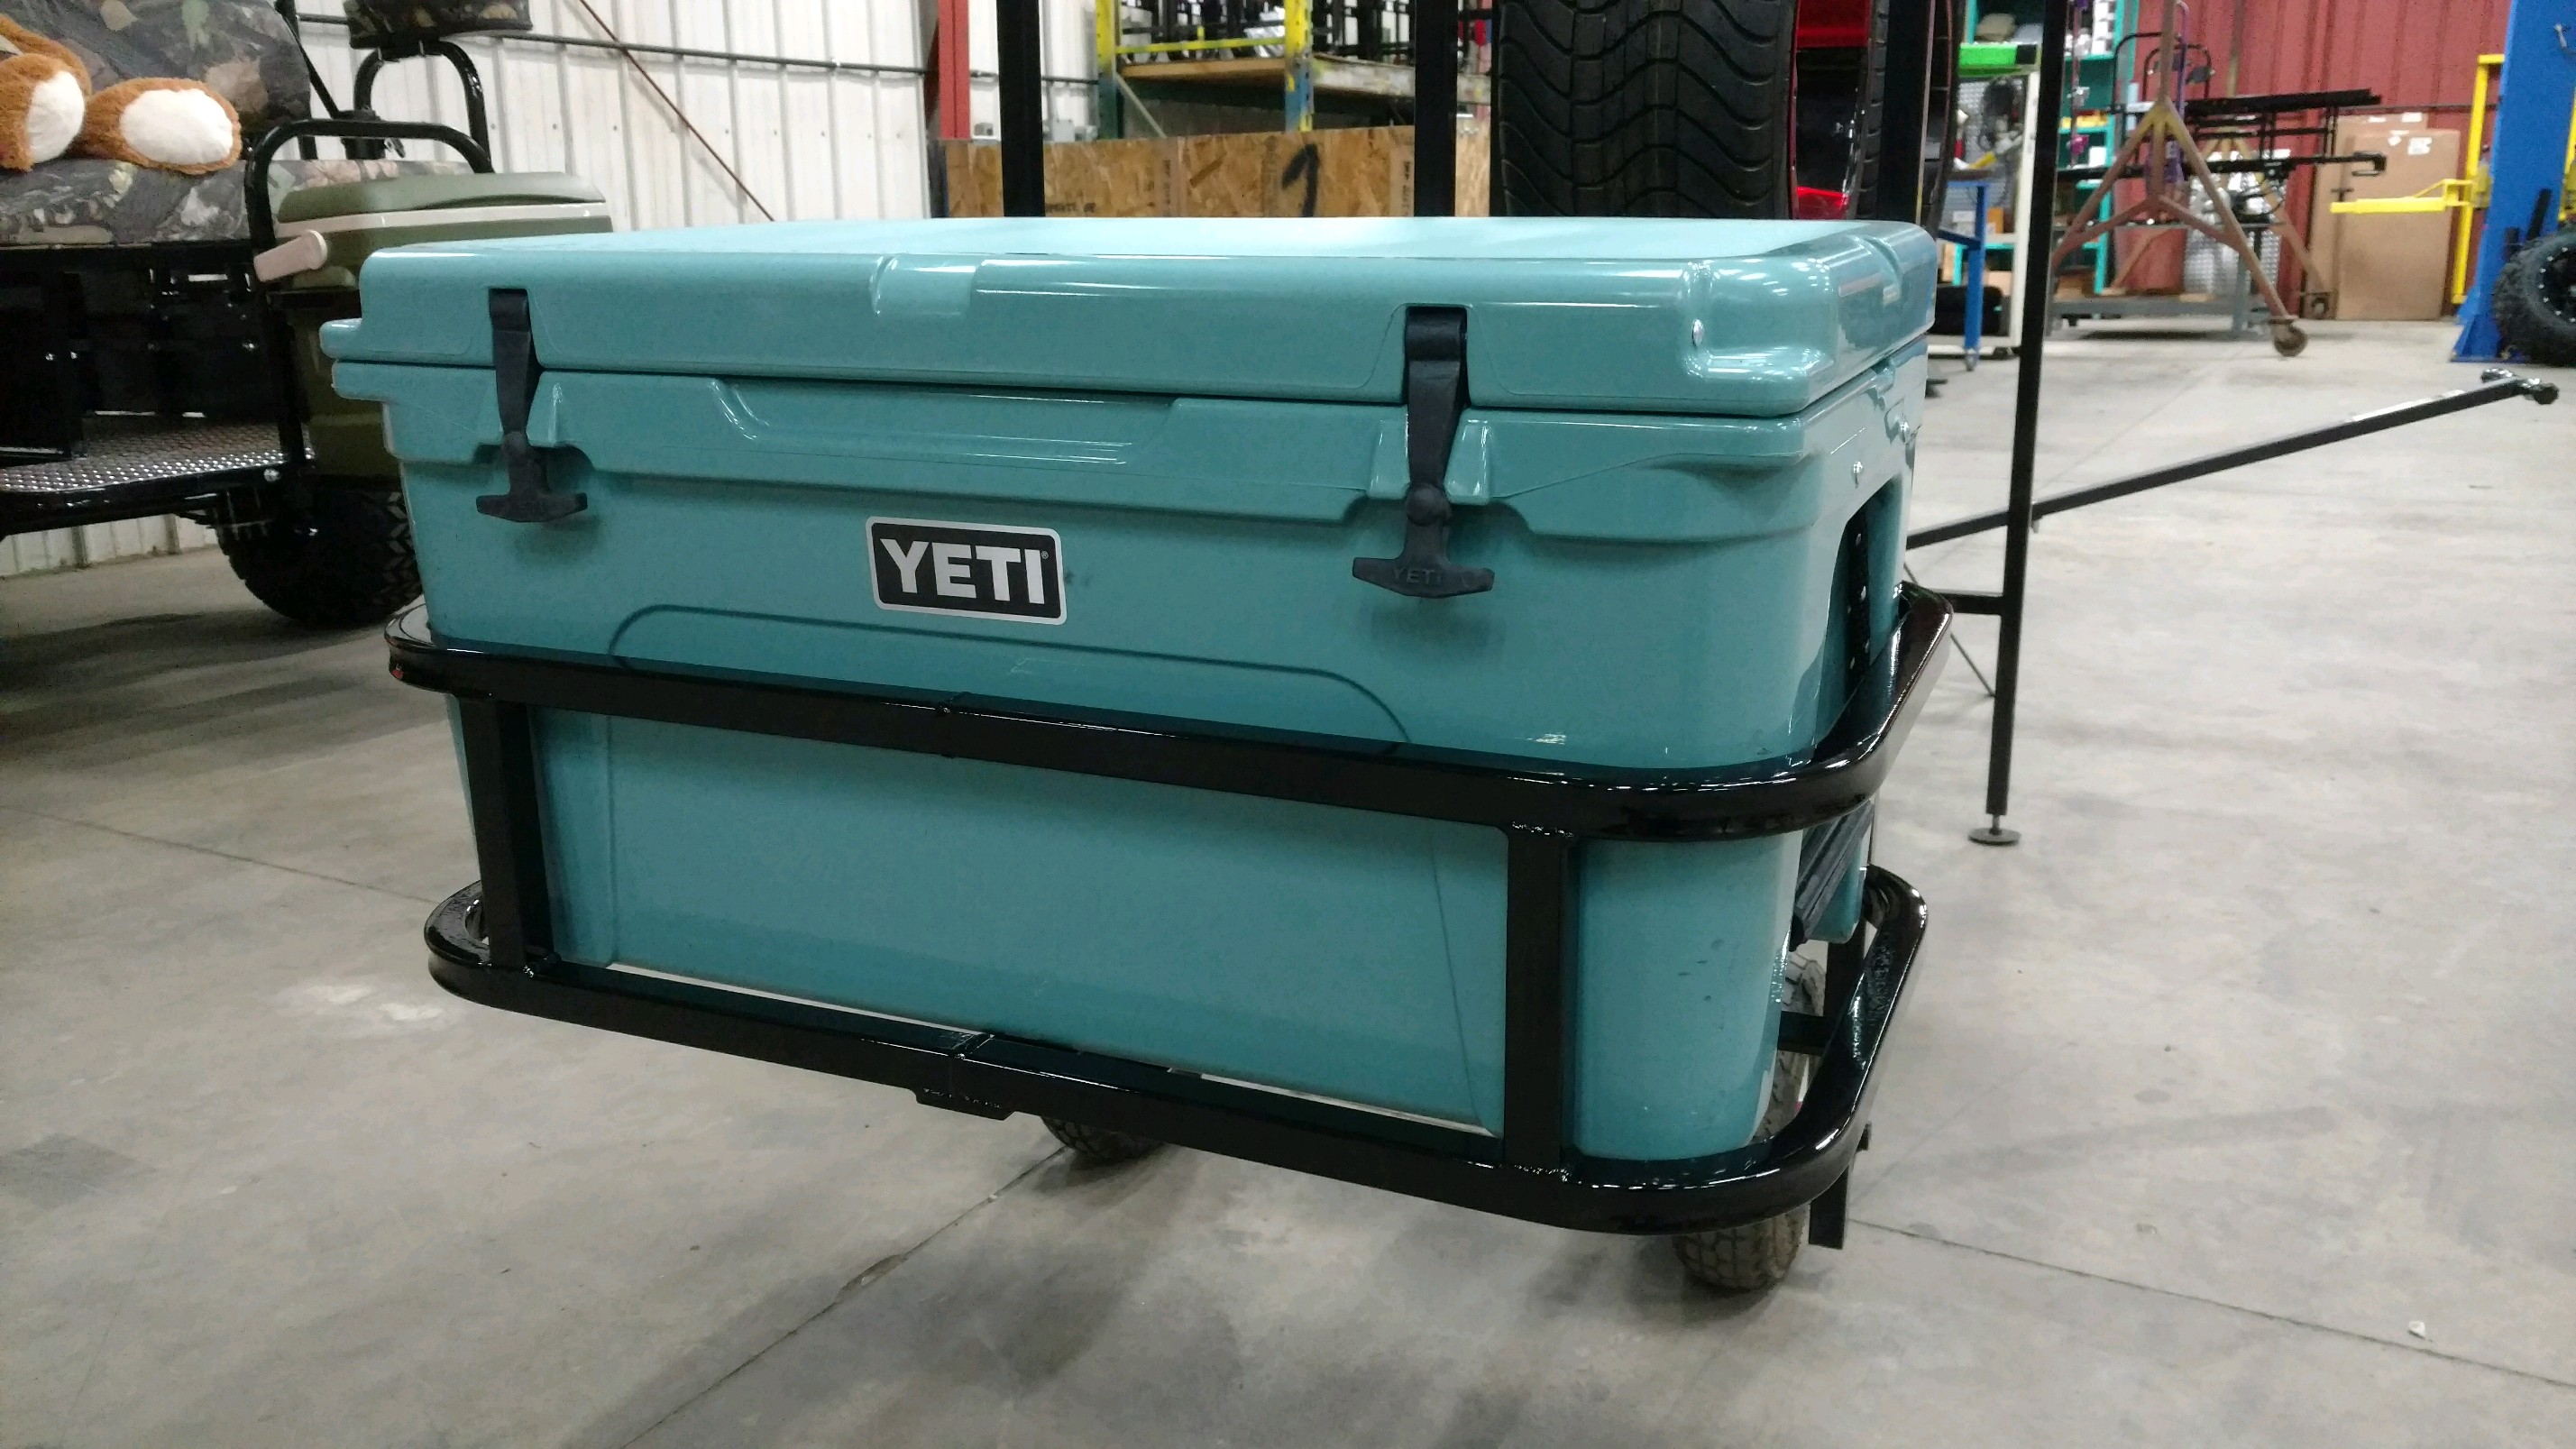 Yeti Tundra 65 Hitch Cooler Carrier